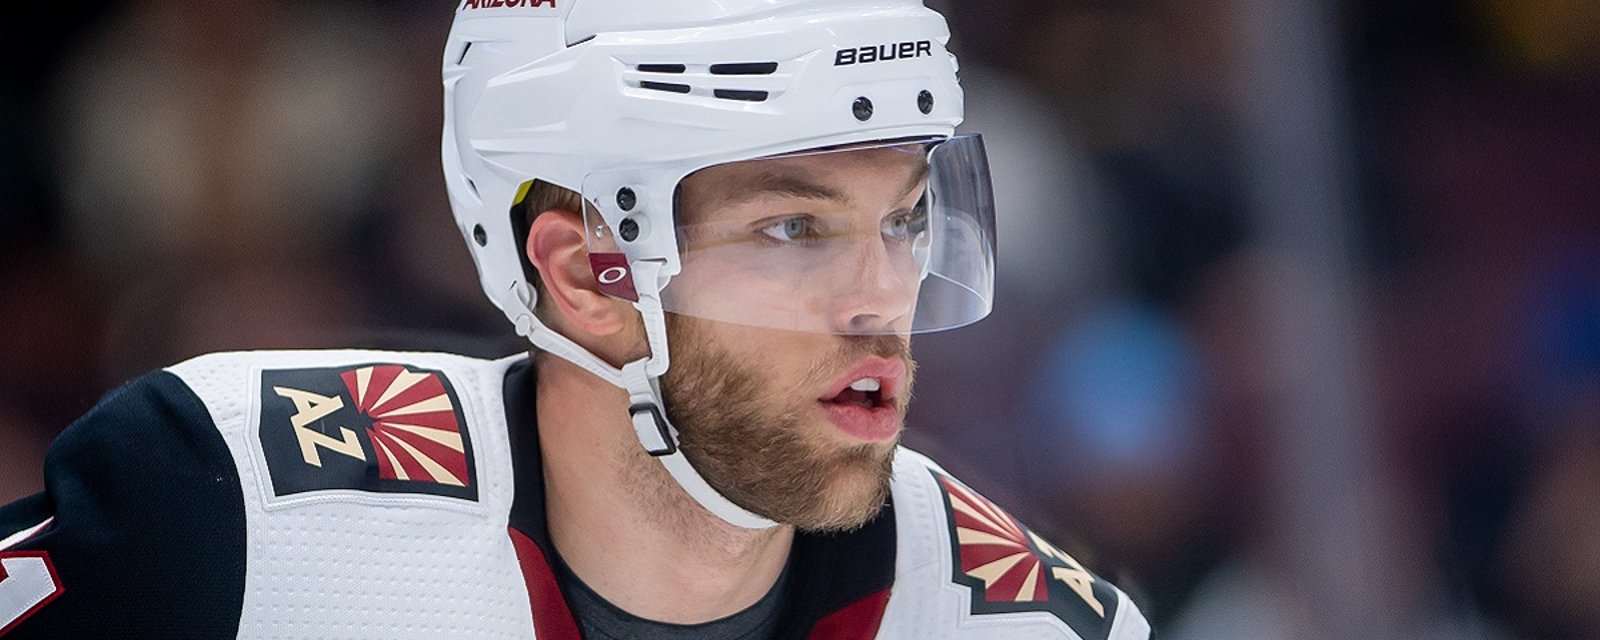 Rumor: Details of Coyotes “low-ball” offer to Taylor Hall revealed.